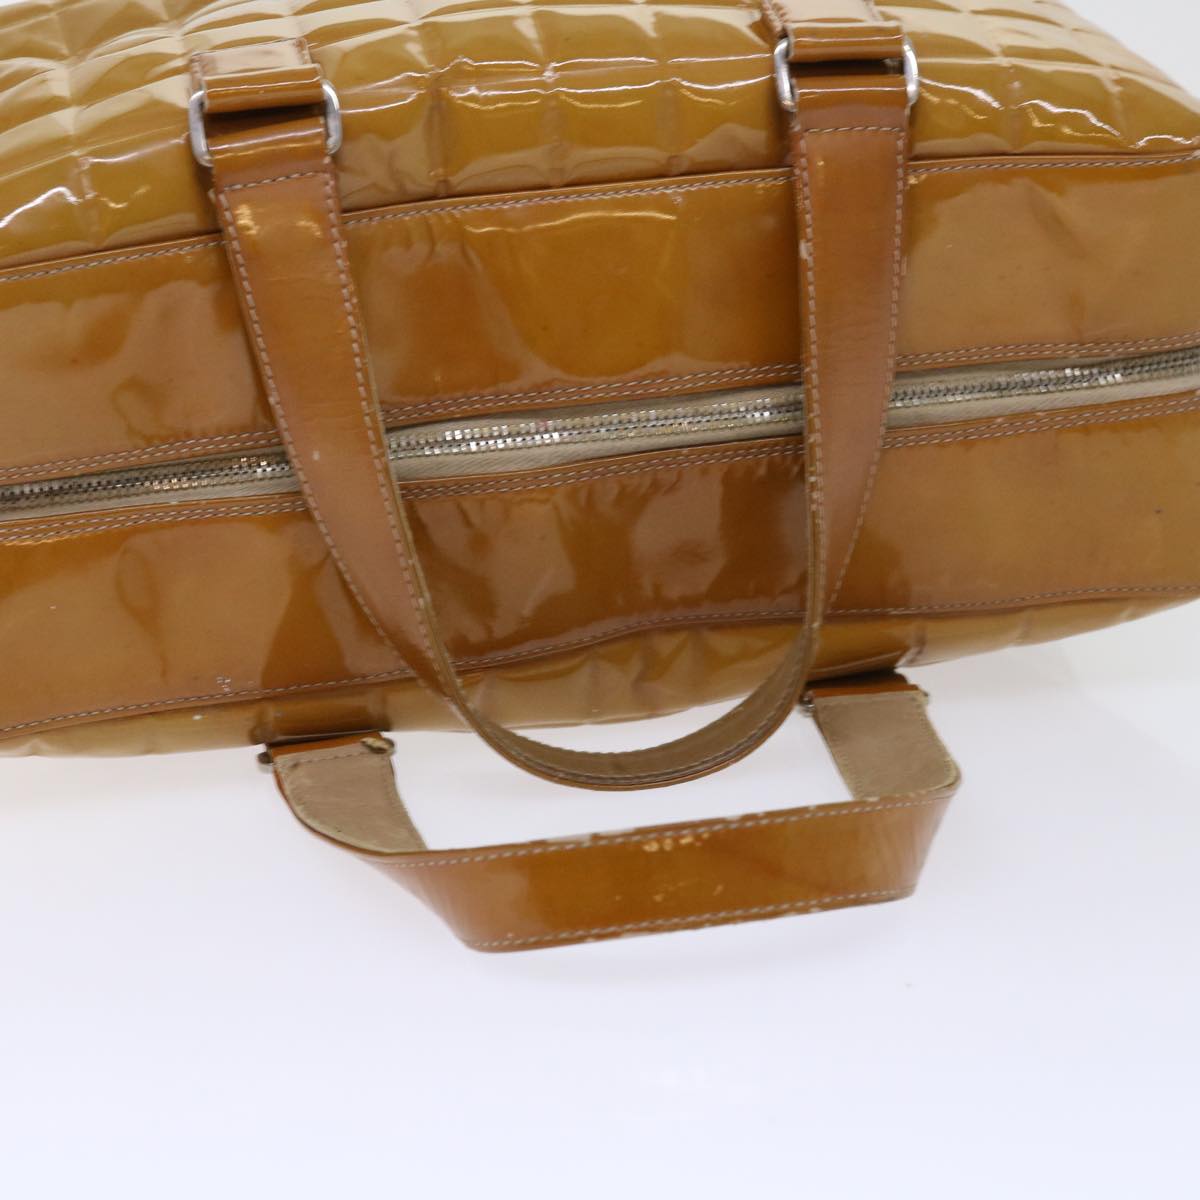 CHANEL Choco Bar Line Shoulder Bag Patent leather Yellow CC Auth bs7801